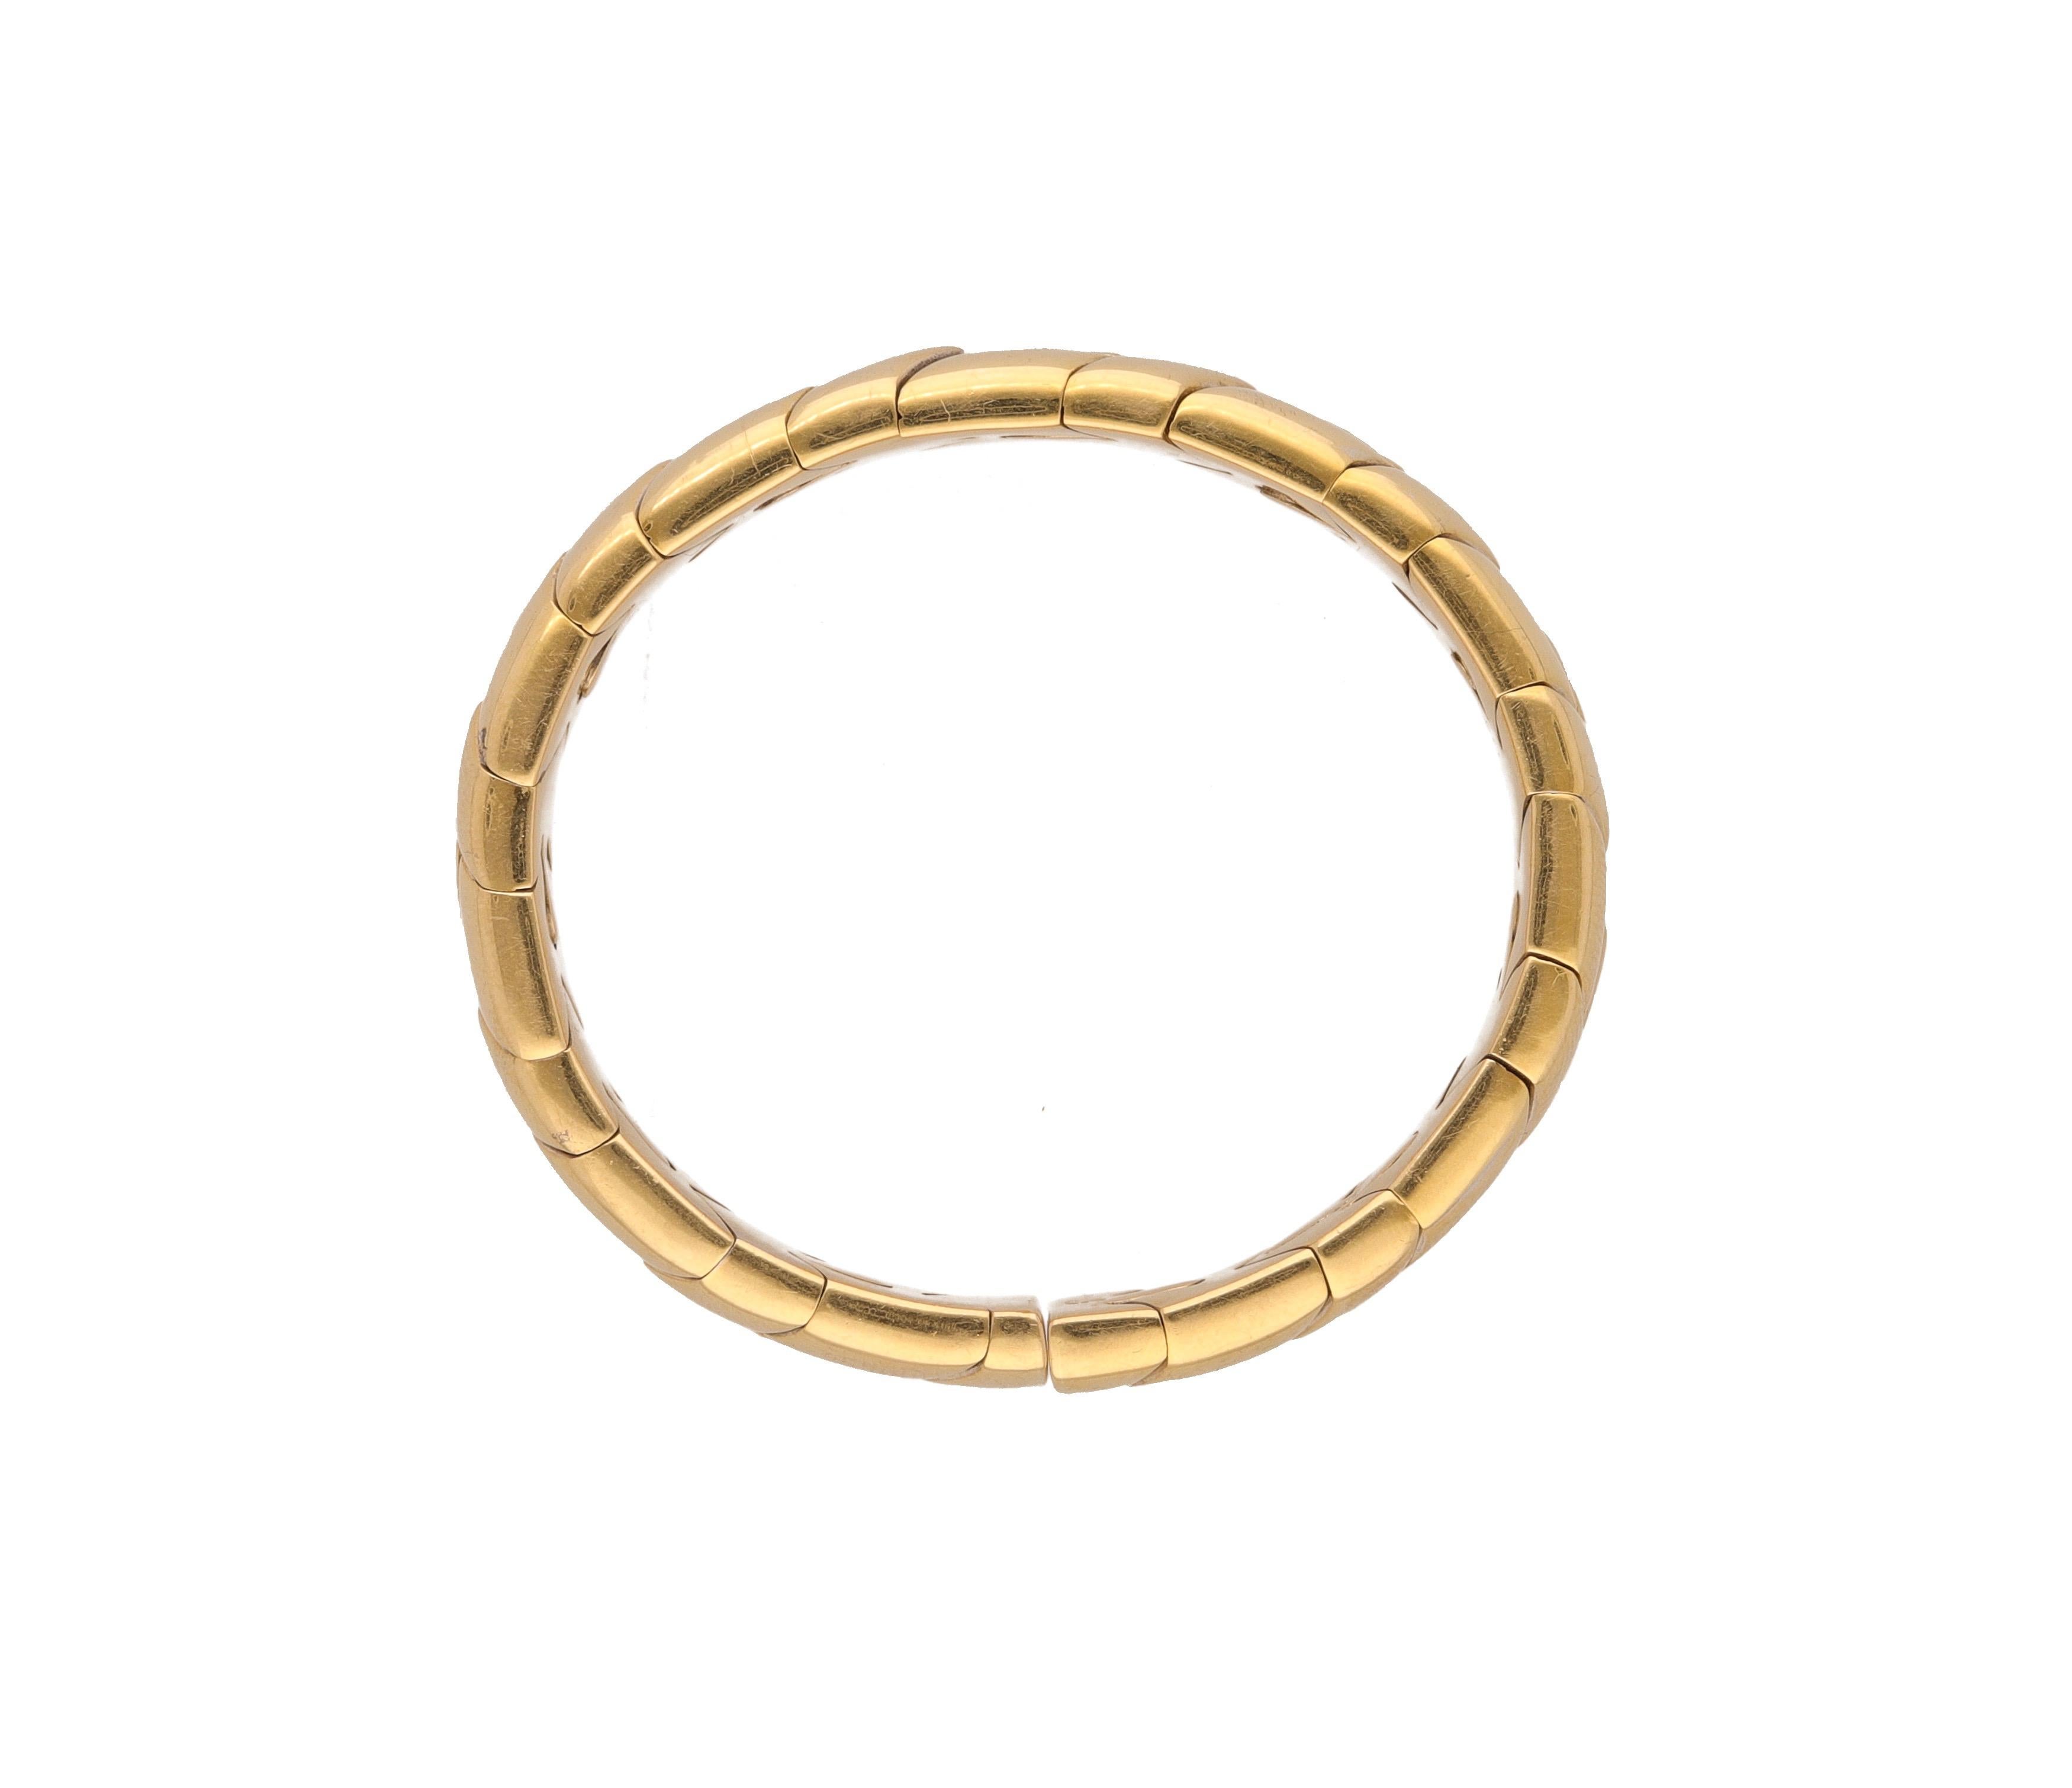 This flexible 18 kt. yellow gold bangle by Bulgari is very classic and suitable for any style.
Is Hand-made in Italy, since 1980 ca.
The inner circumference measures 4,7 cm. but it can fit different sizes.
Signed Bulgari.

